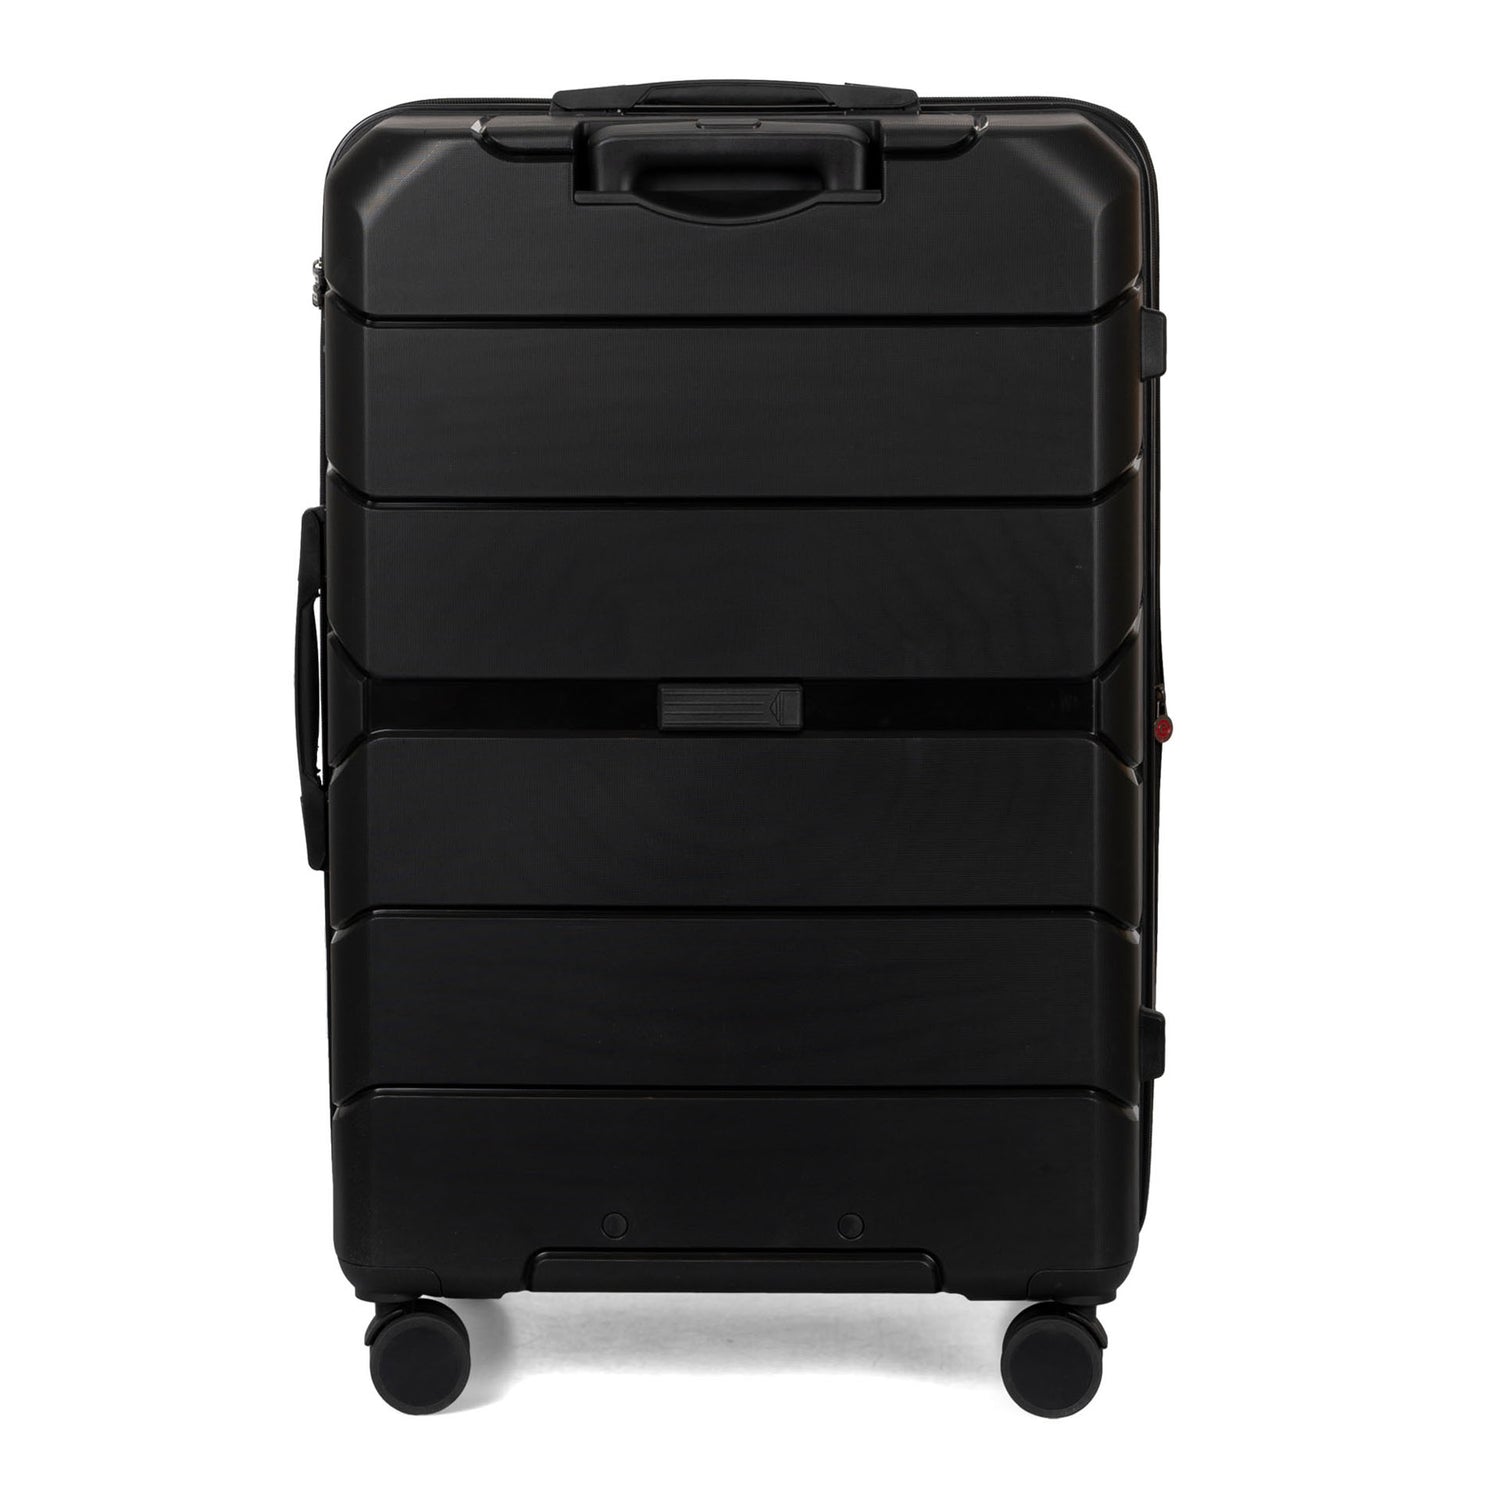 Back side view of a black hard side luggage called Altitude designed by Air Canada sold at Bentley, showcasing its resistant shell texture.